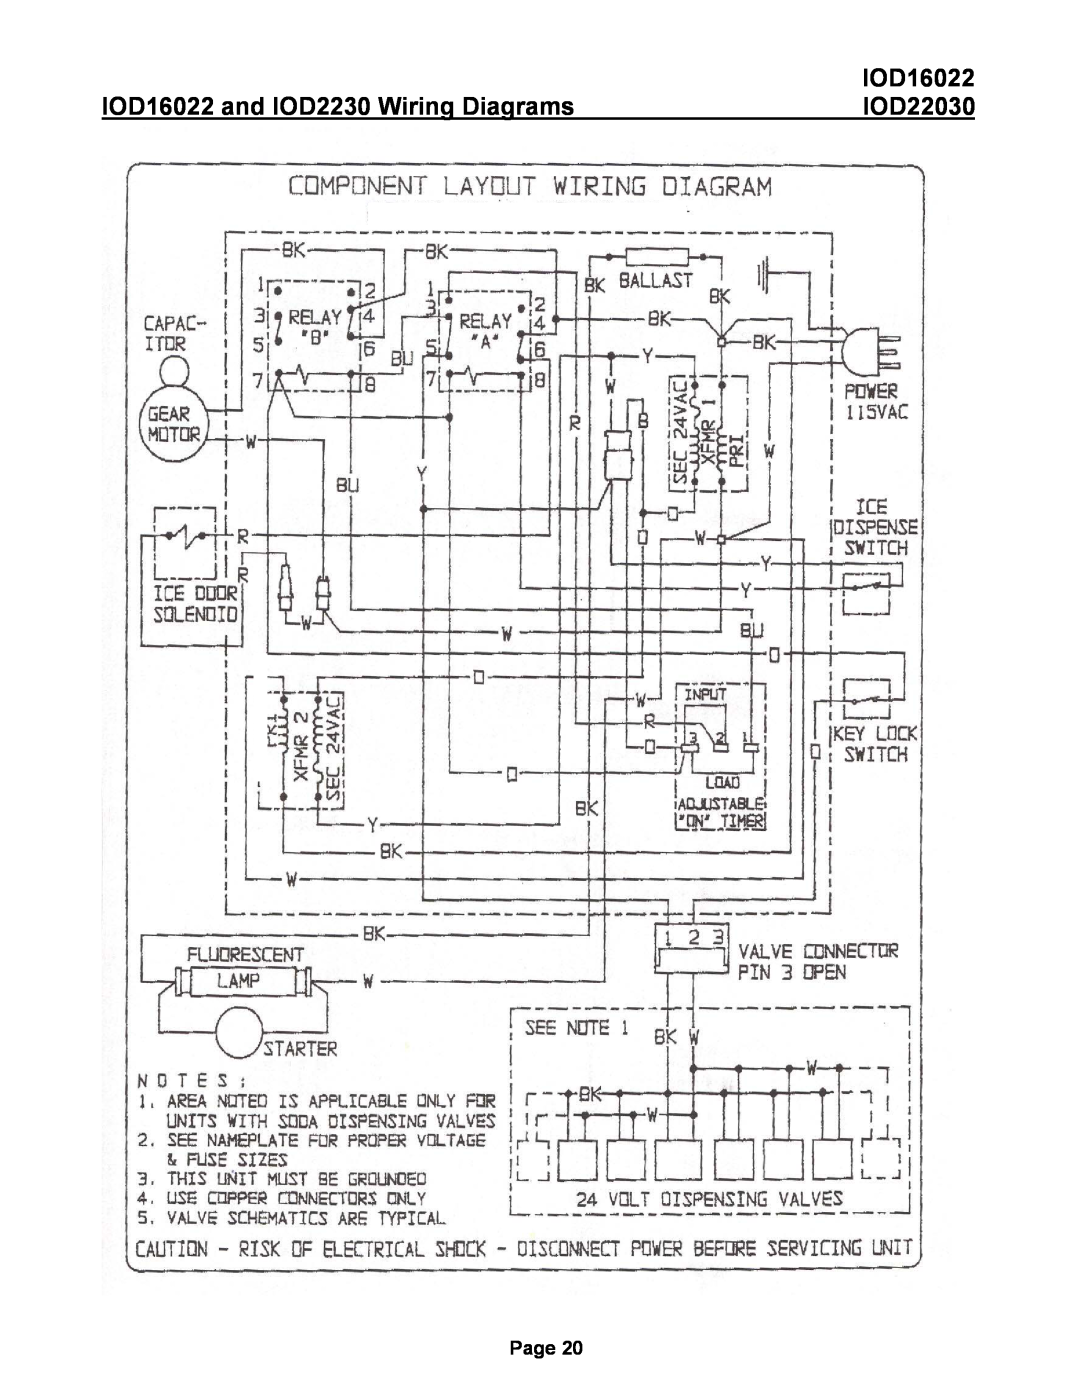 Ice-O-Matic IOD22030 manual IOD16022 and IOD2230 Wiring Diagrams, Page 